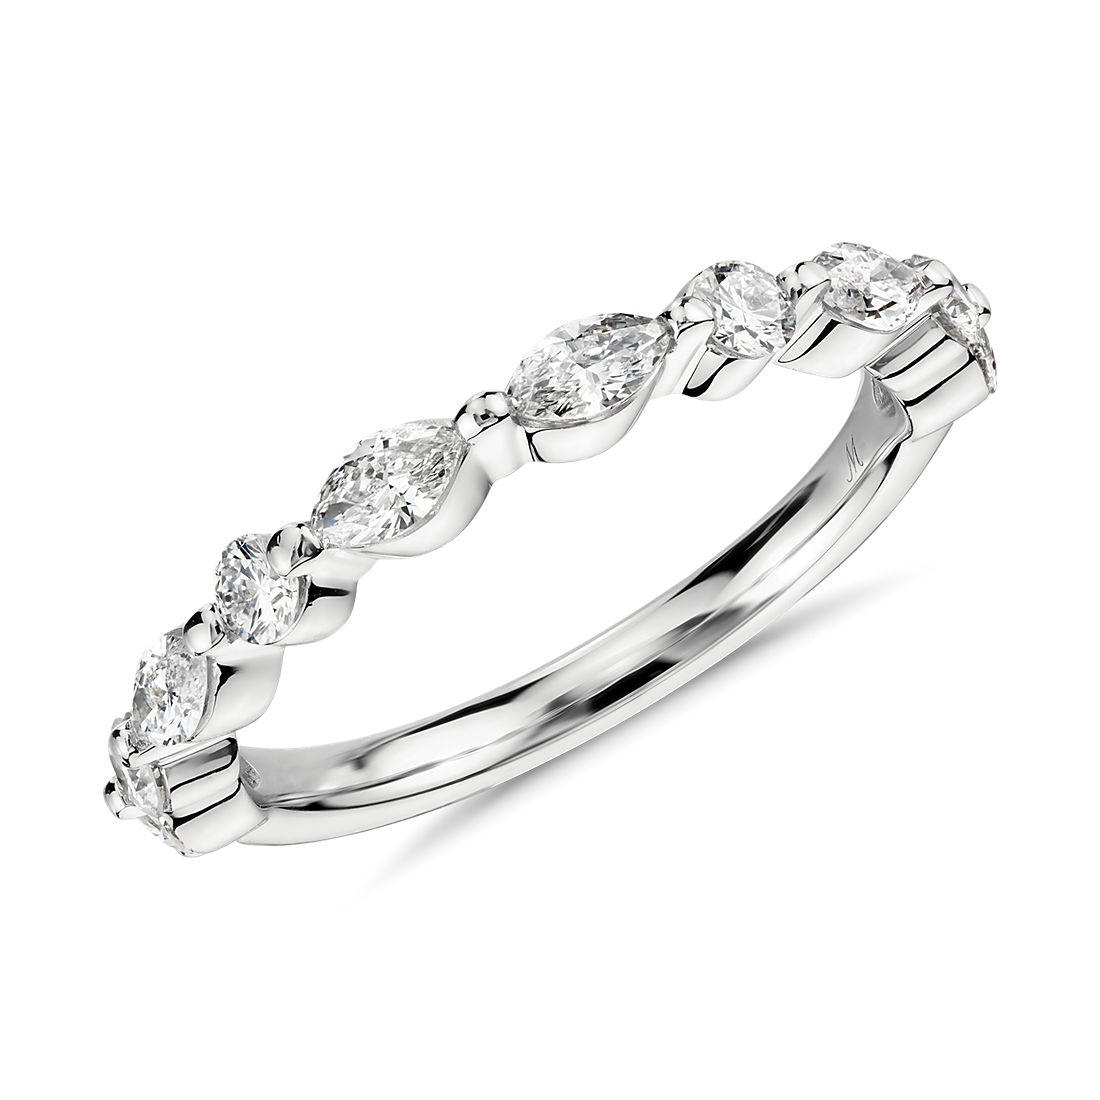 Marquise Wedding Ring With Band Wedding Rings Sets Ideas